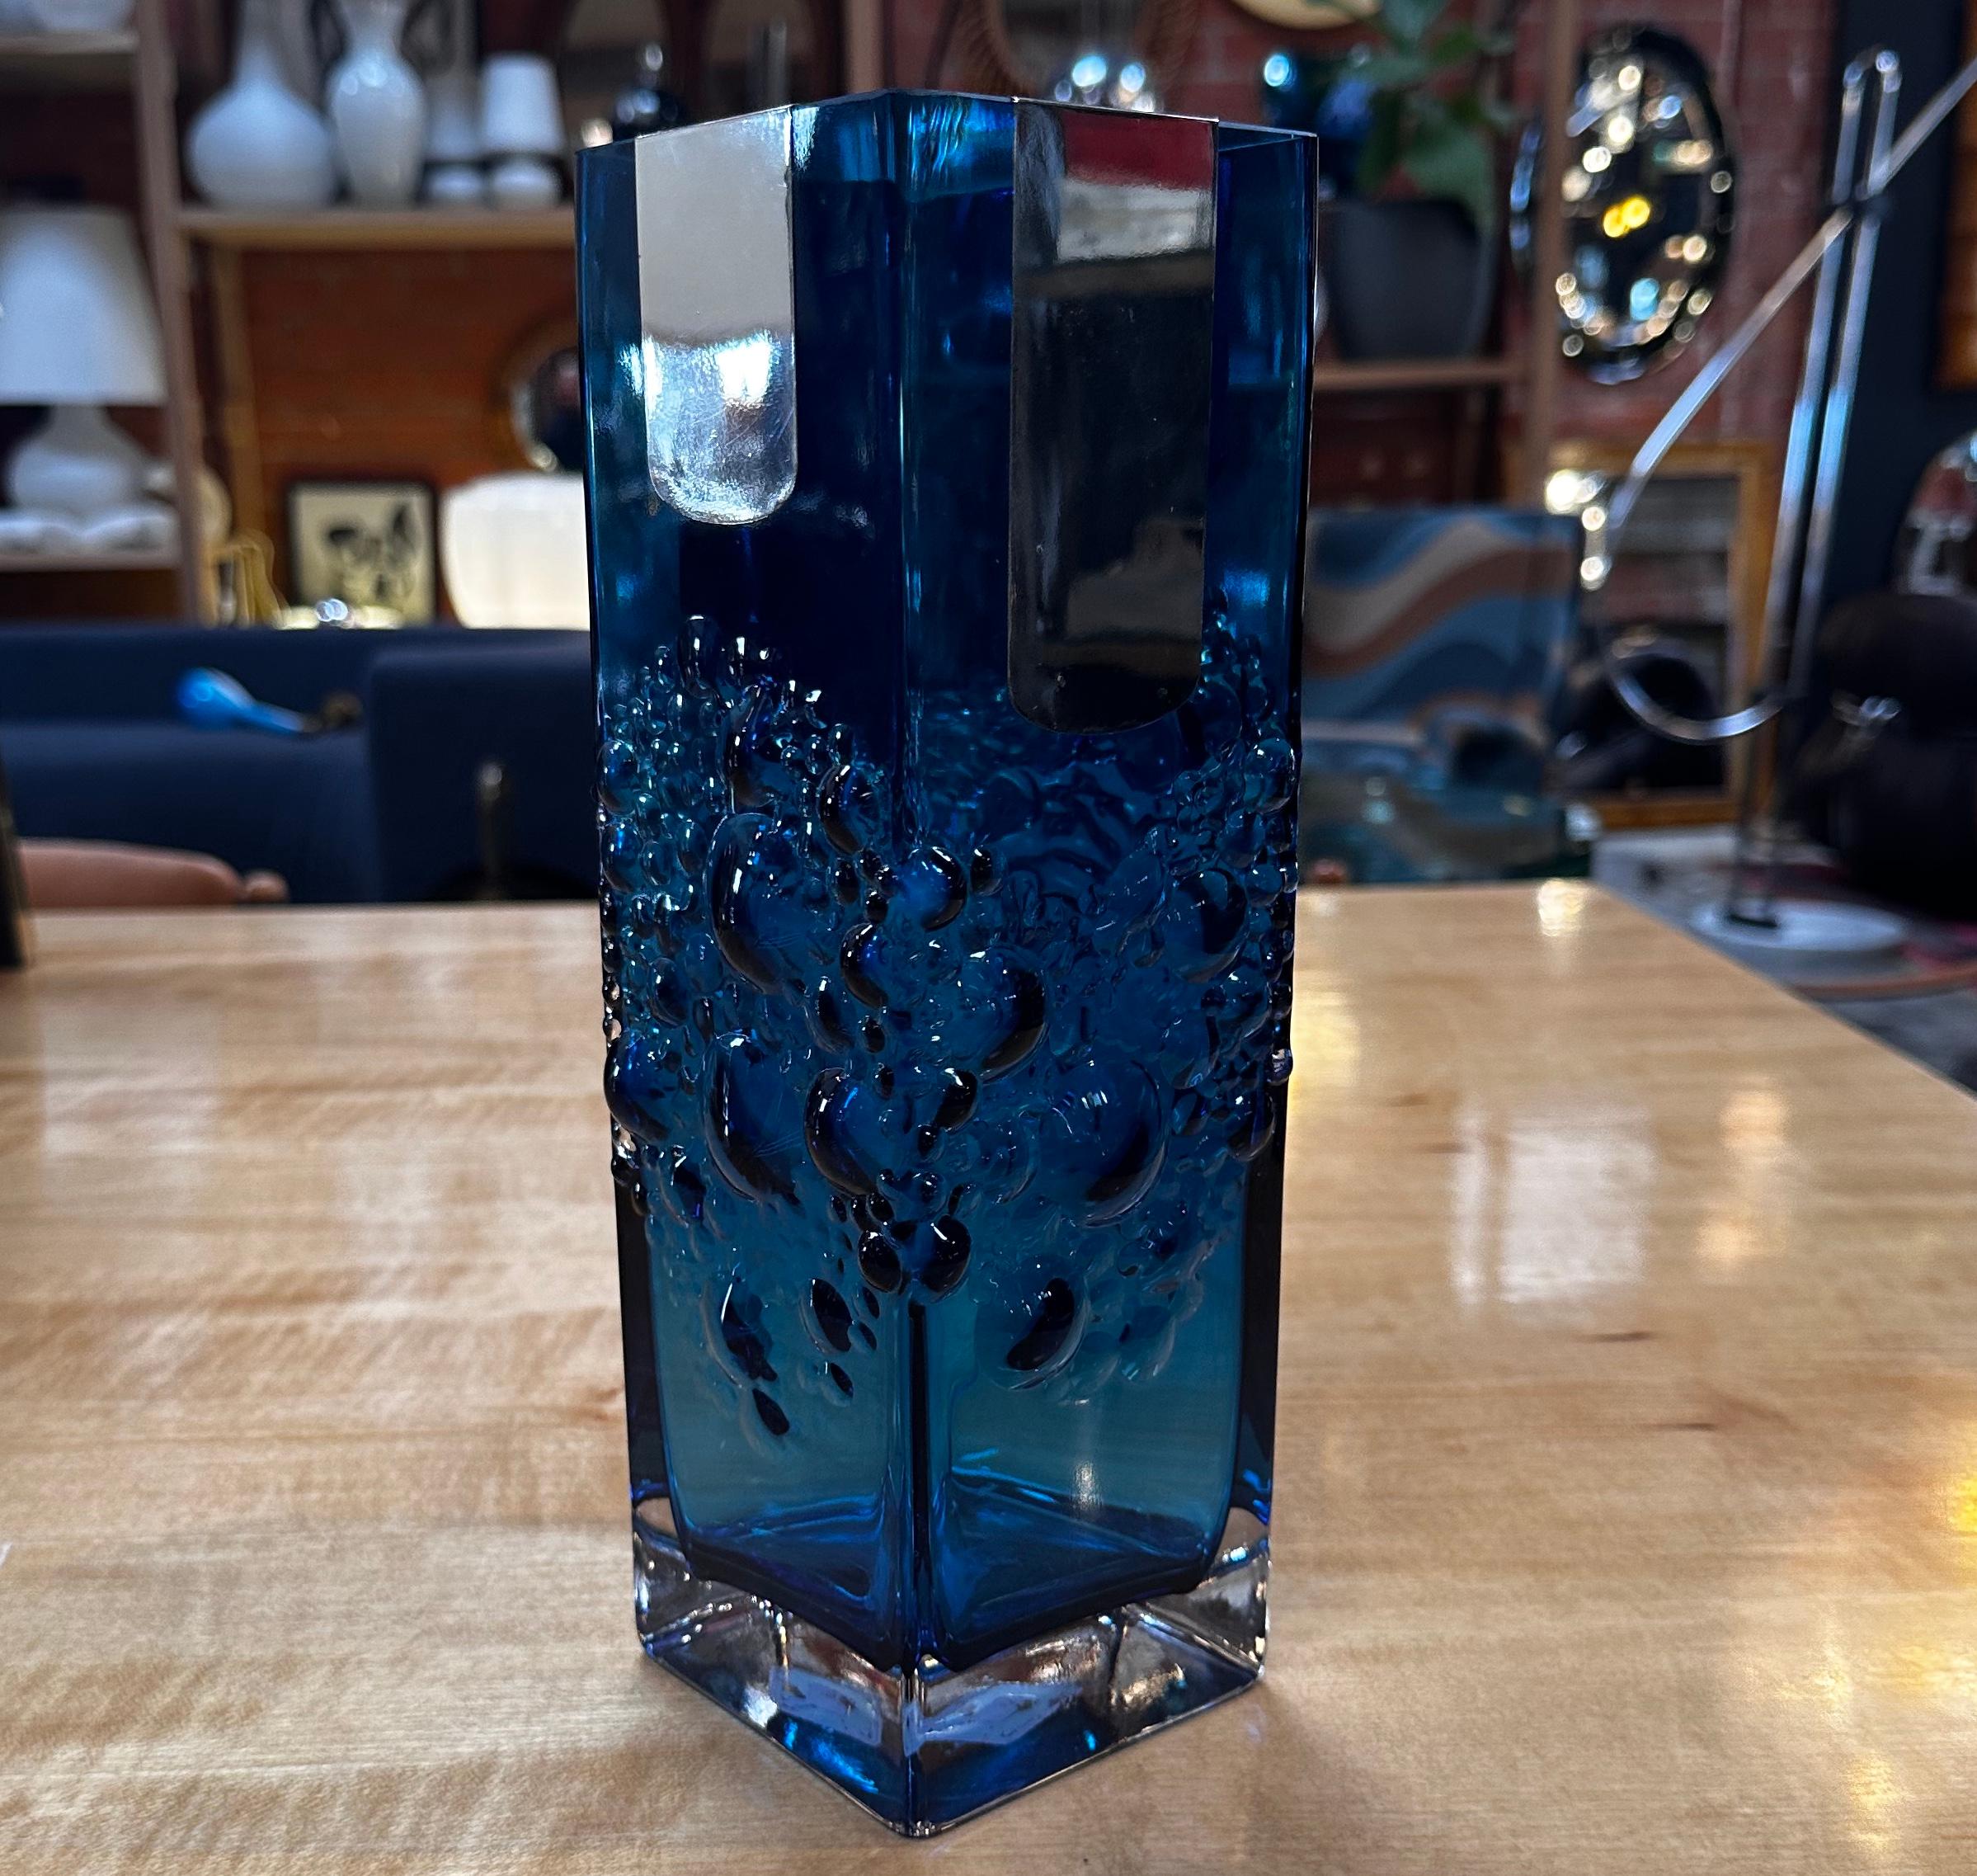 A Vintage Italian Decorative Blue Vase from the 1980s is a stylish piece that captures the essence of Italian design during that era. The vase features a striking blue hue, showcasing the vibrant and eclectic aesthetics of the 1980s, making it a